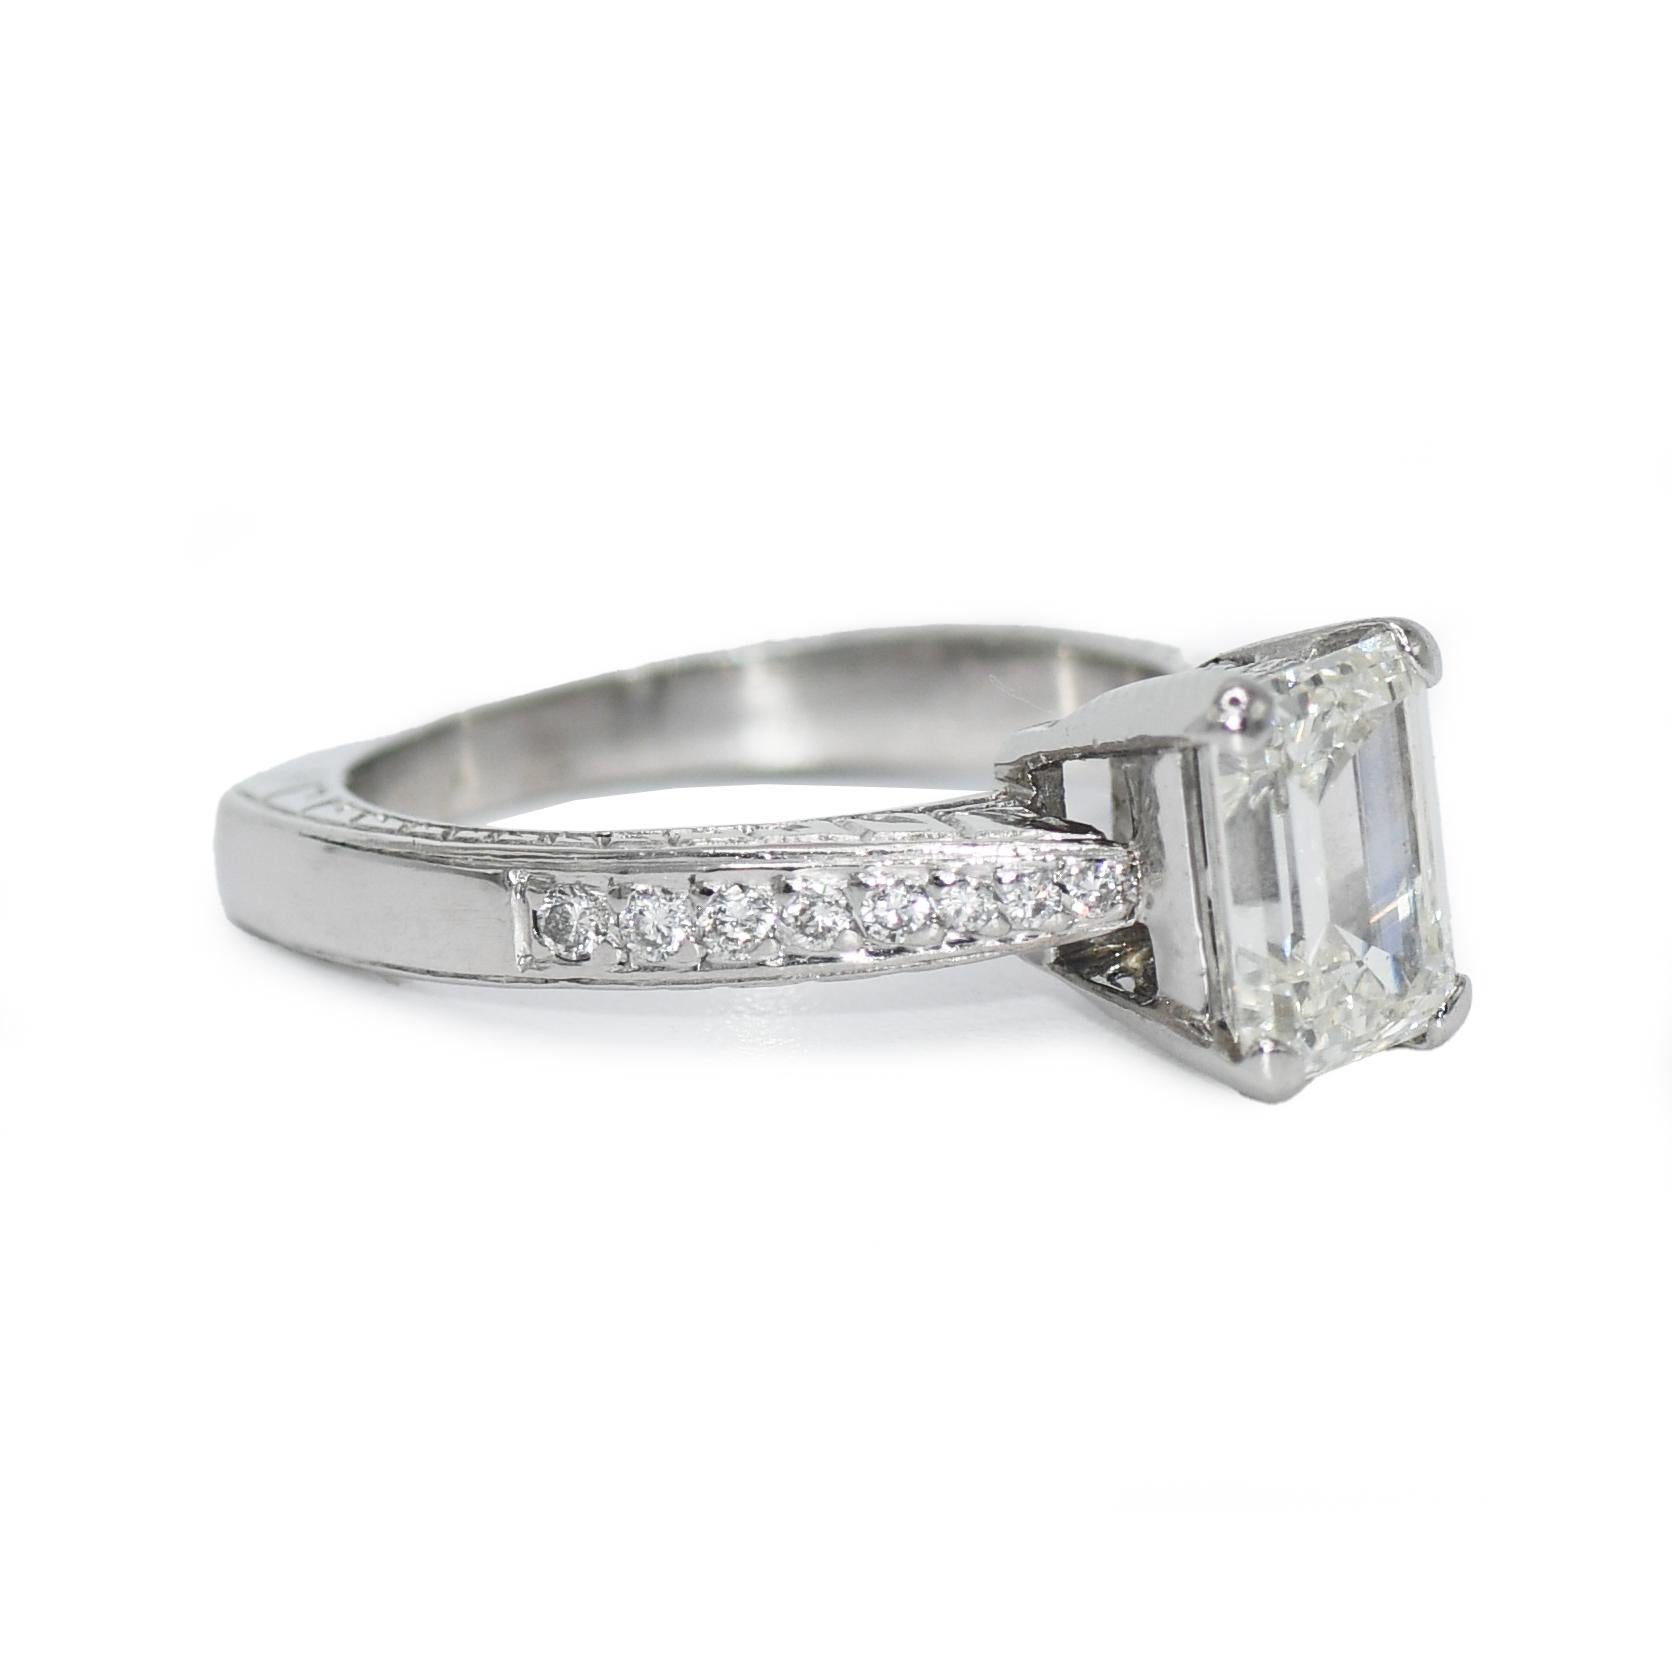 Ladies diamond engagement ring in platinum setting. Stamped Plat and weighs 6.5 grams.
The center diamond is an emerald cut diamond, 1.59 carats , EGL graded i color, Vs1 clarity.
Report number is US 89884902D.
The diamond has very good